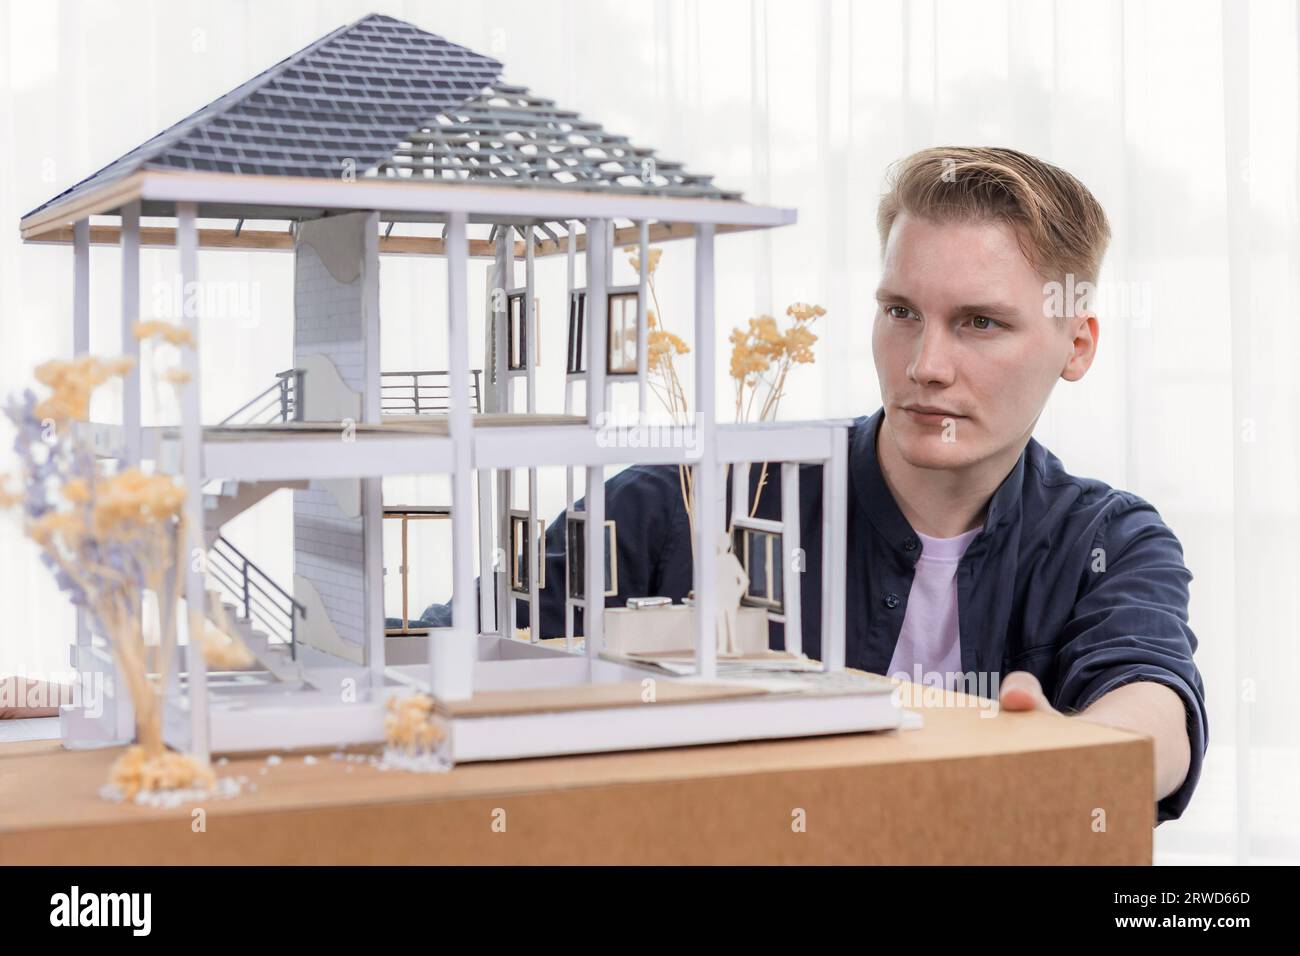 Architect designer reviewing house frame model with no wall, brainstorming interior design and improvement idea with actual home scale. Professional Stock Photo